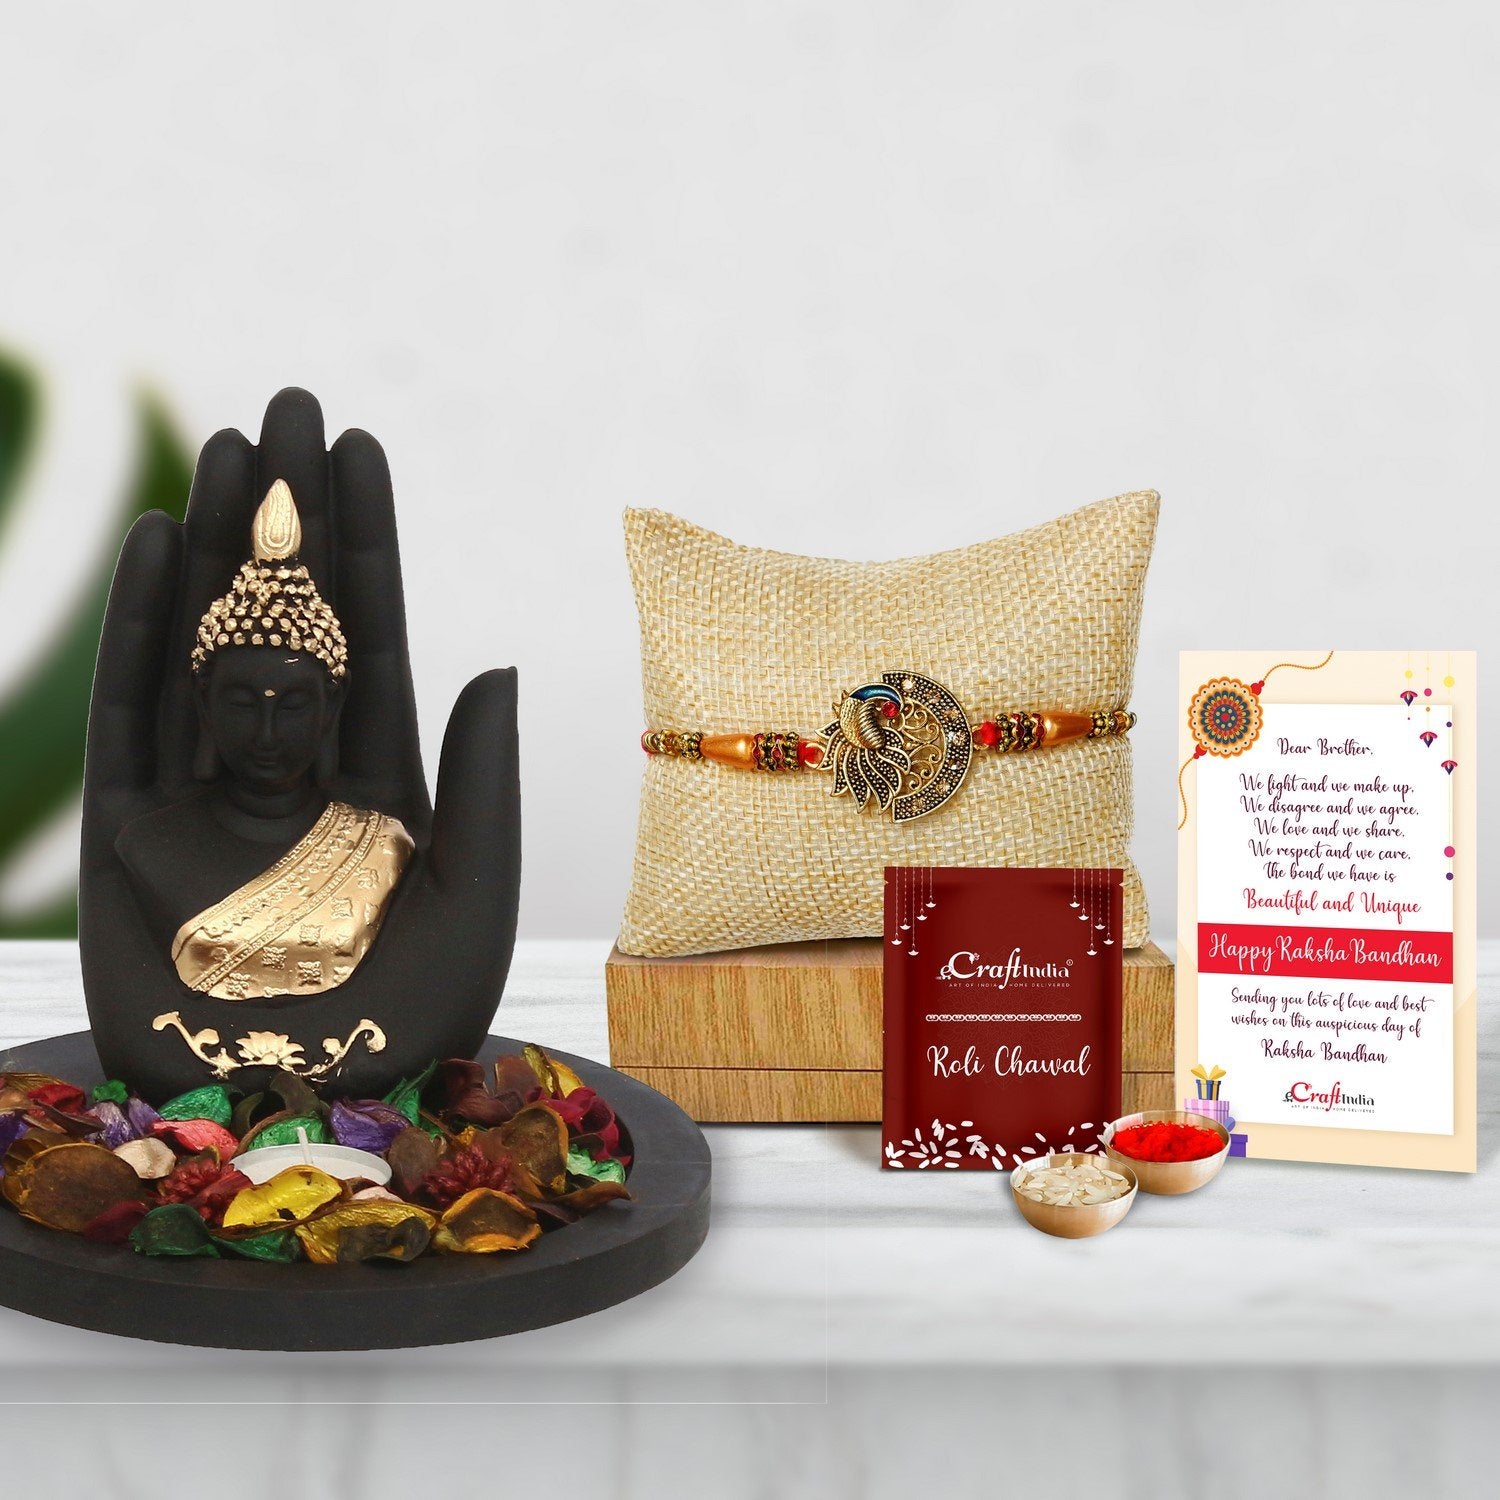 Designer Peacock Rakhi with Golden Handcrafted Palm Buddha Decorative Showpiece with Wooden Base, Fragranced Petals and Tealight and Roli Chawal Pack, Best Wishes Greeting Card